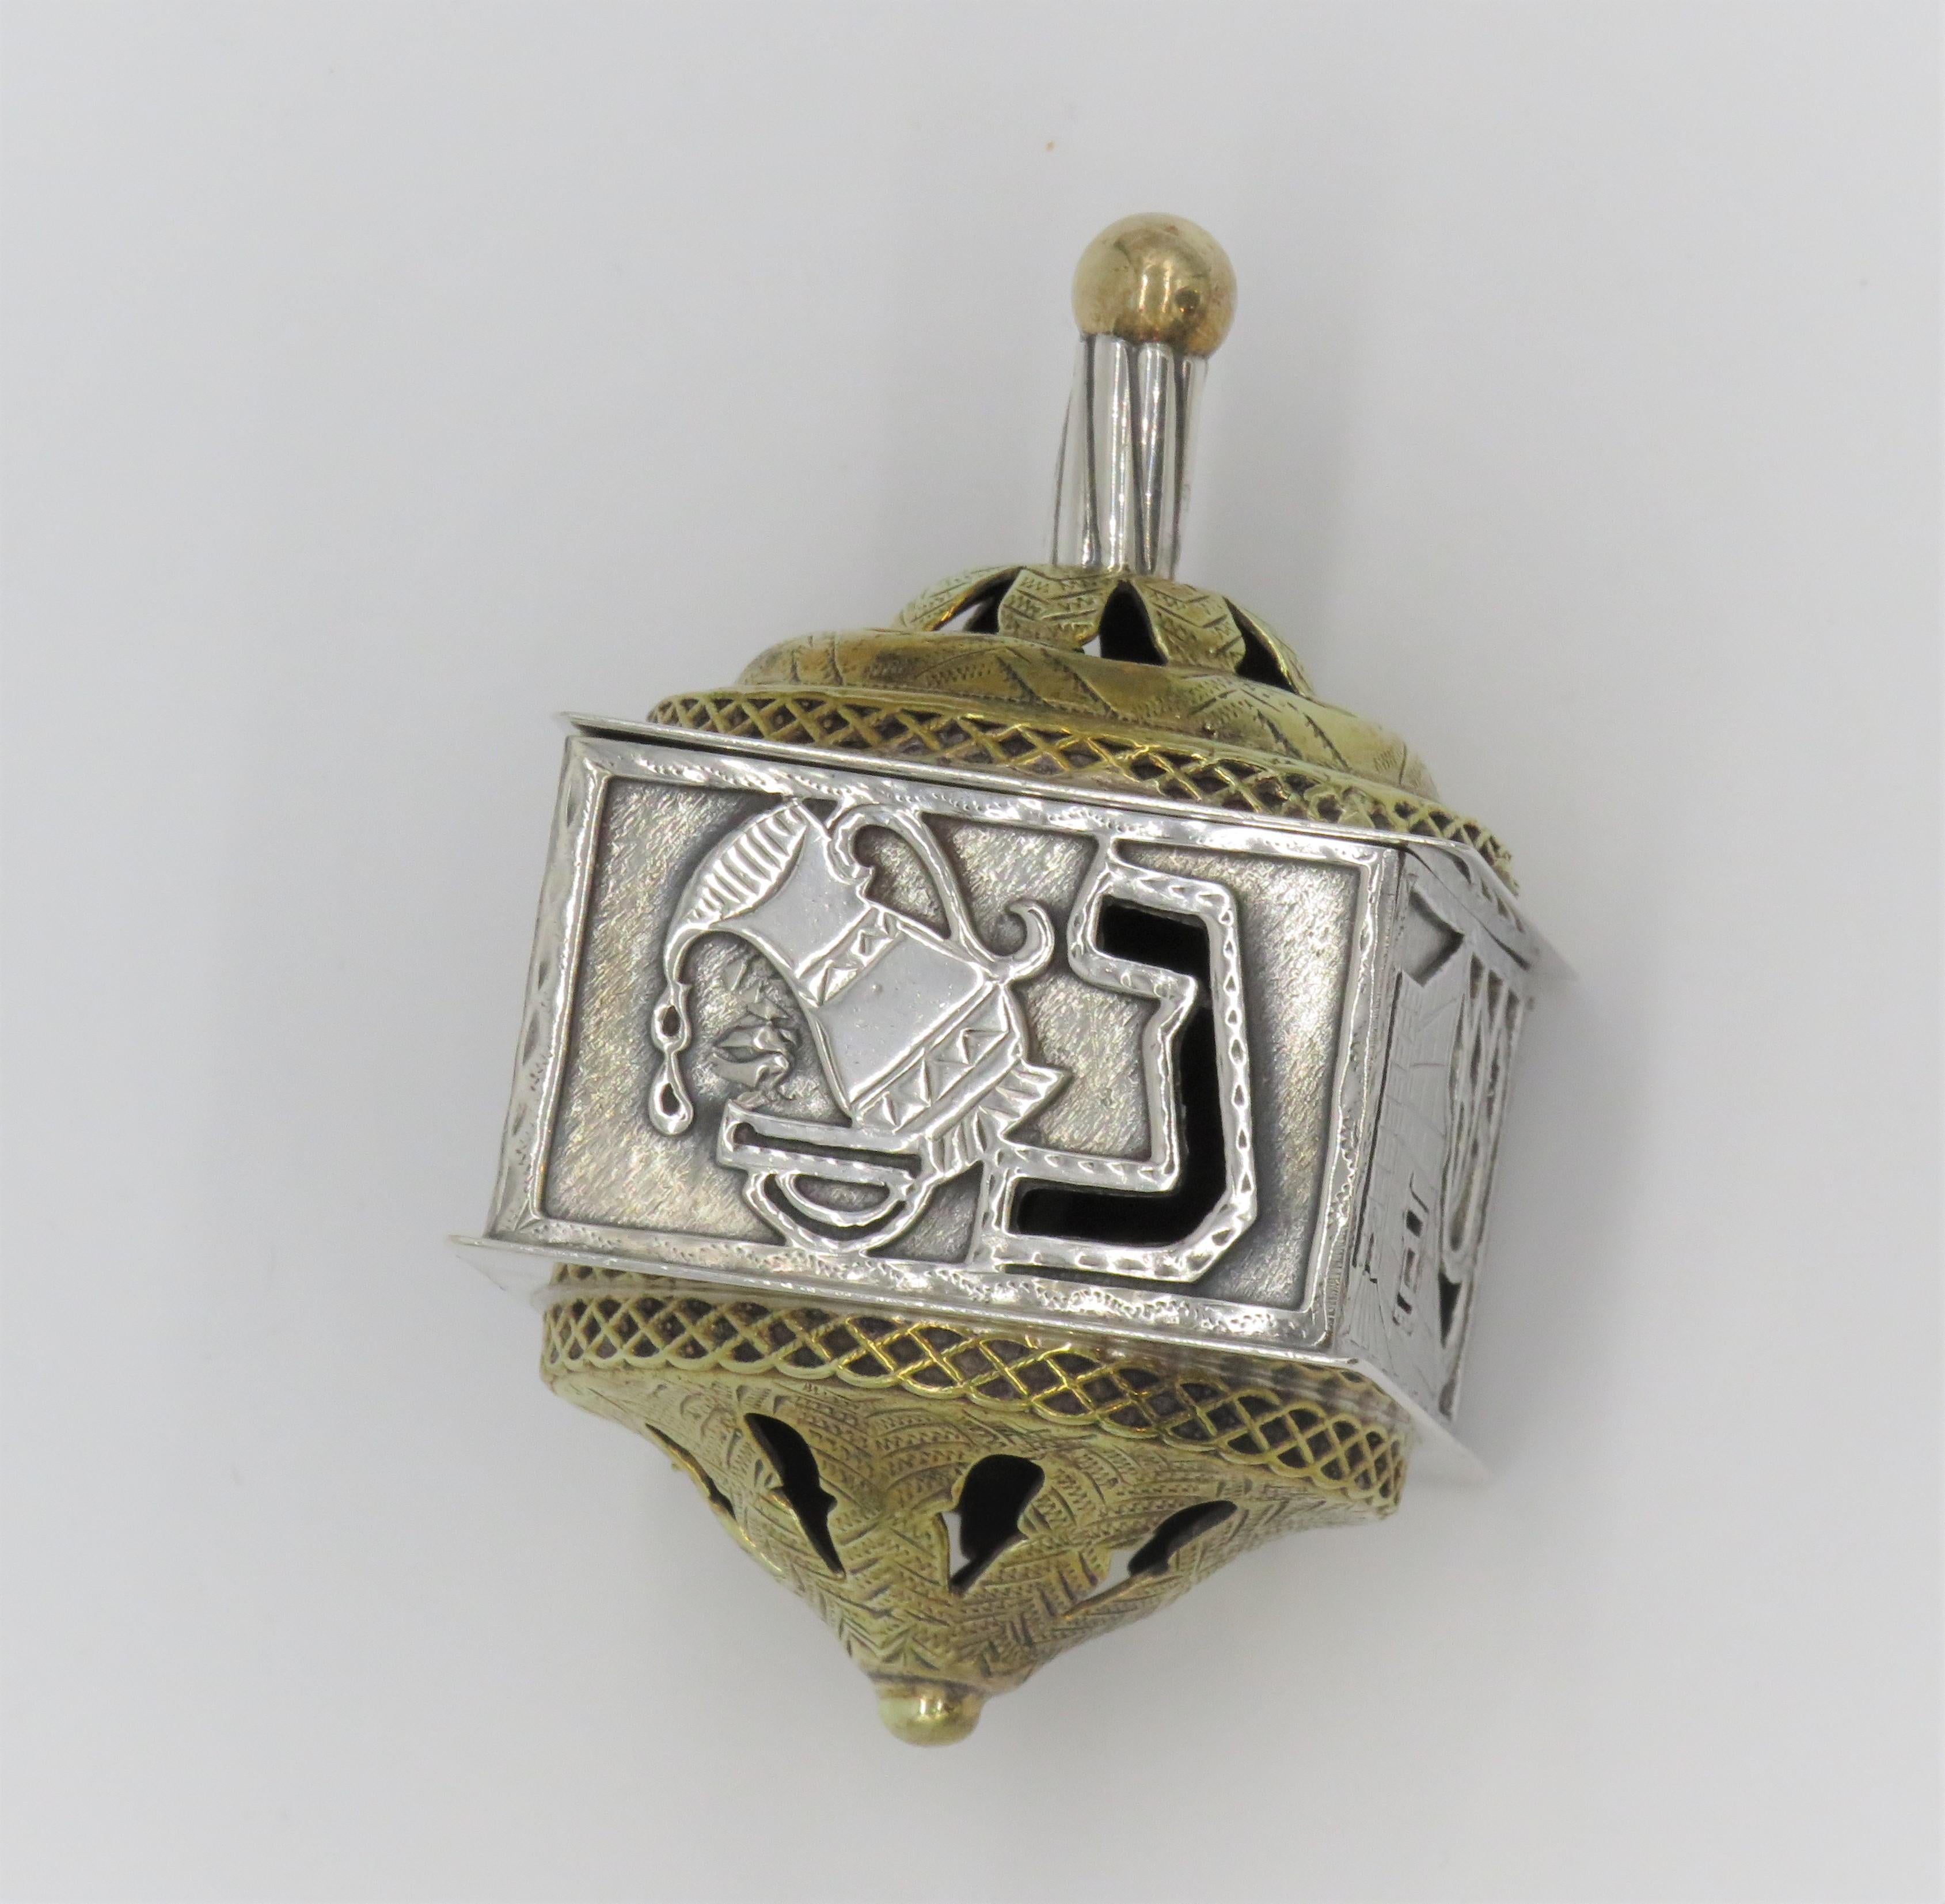 Vintage sterling silver dreidel, Israel. 
Features open work design with four Hebrew letters, and decorated with gilding.
Stamped: 